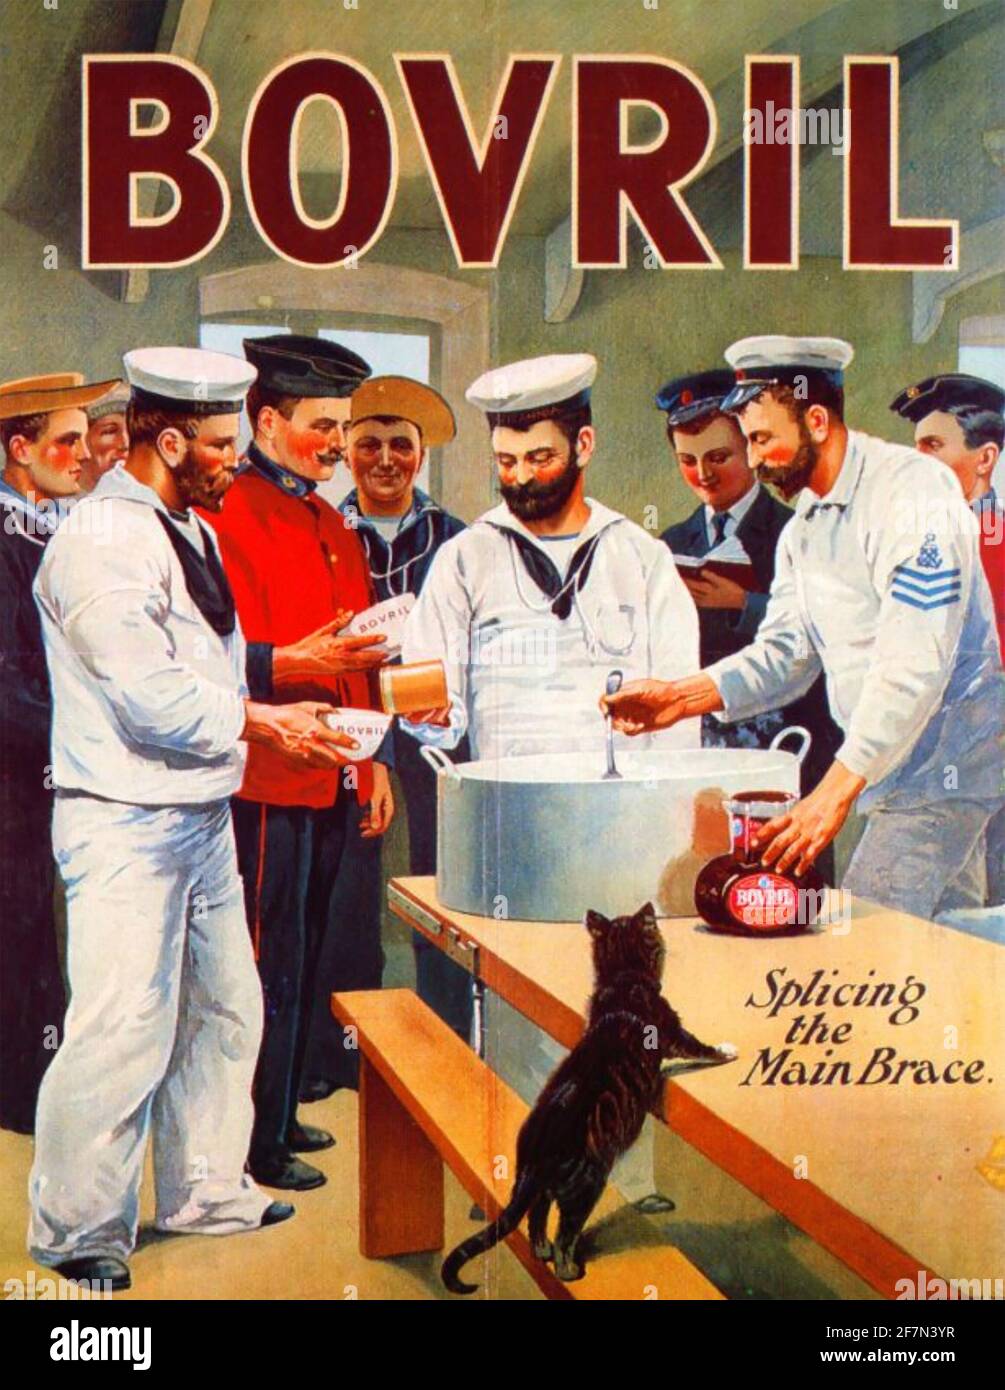 BOVRIL advert about 1890 Stock Photo